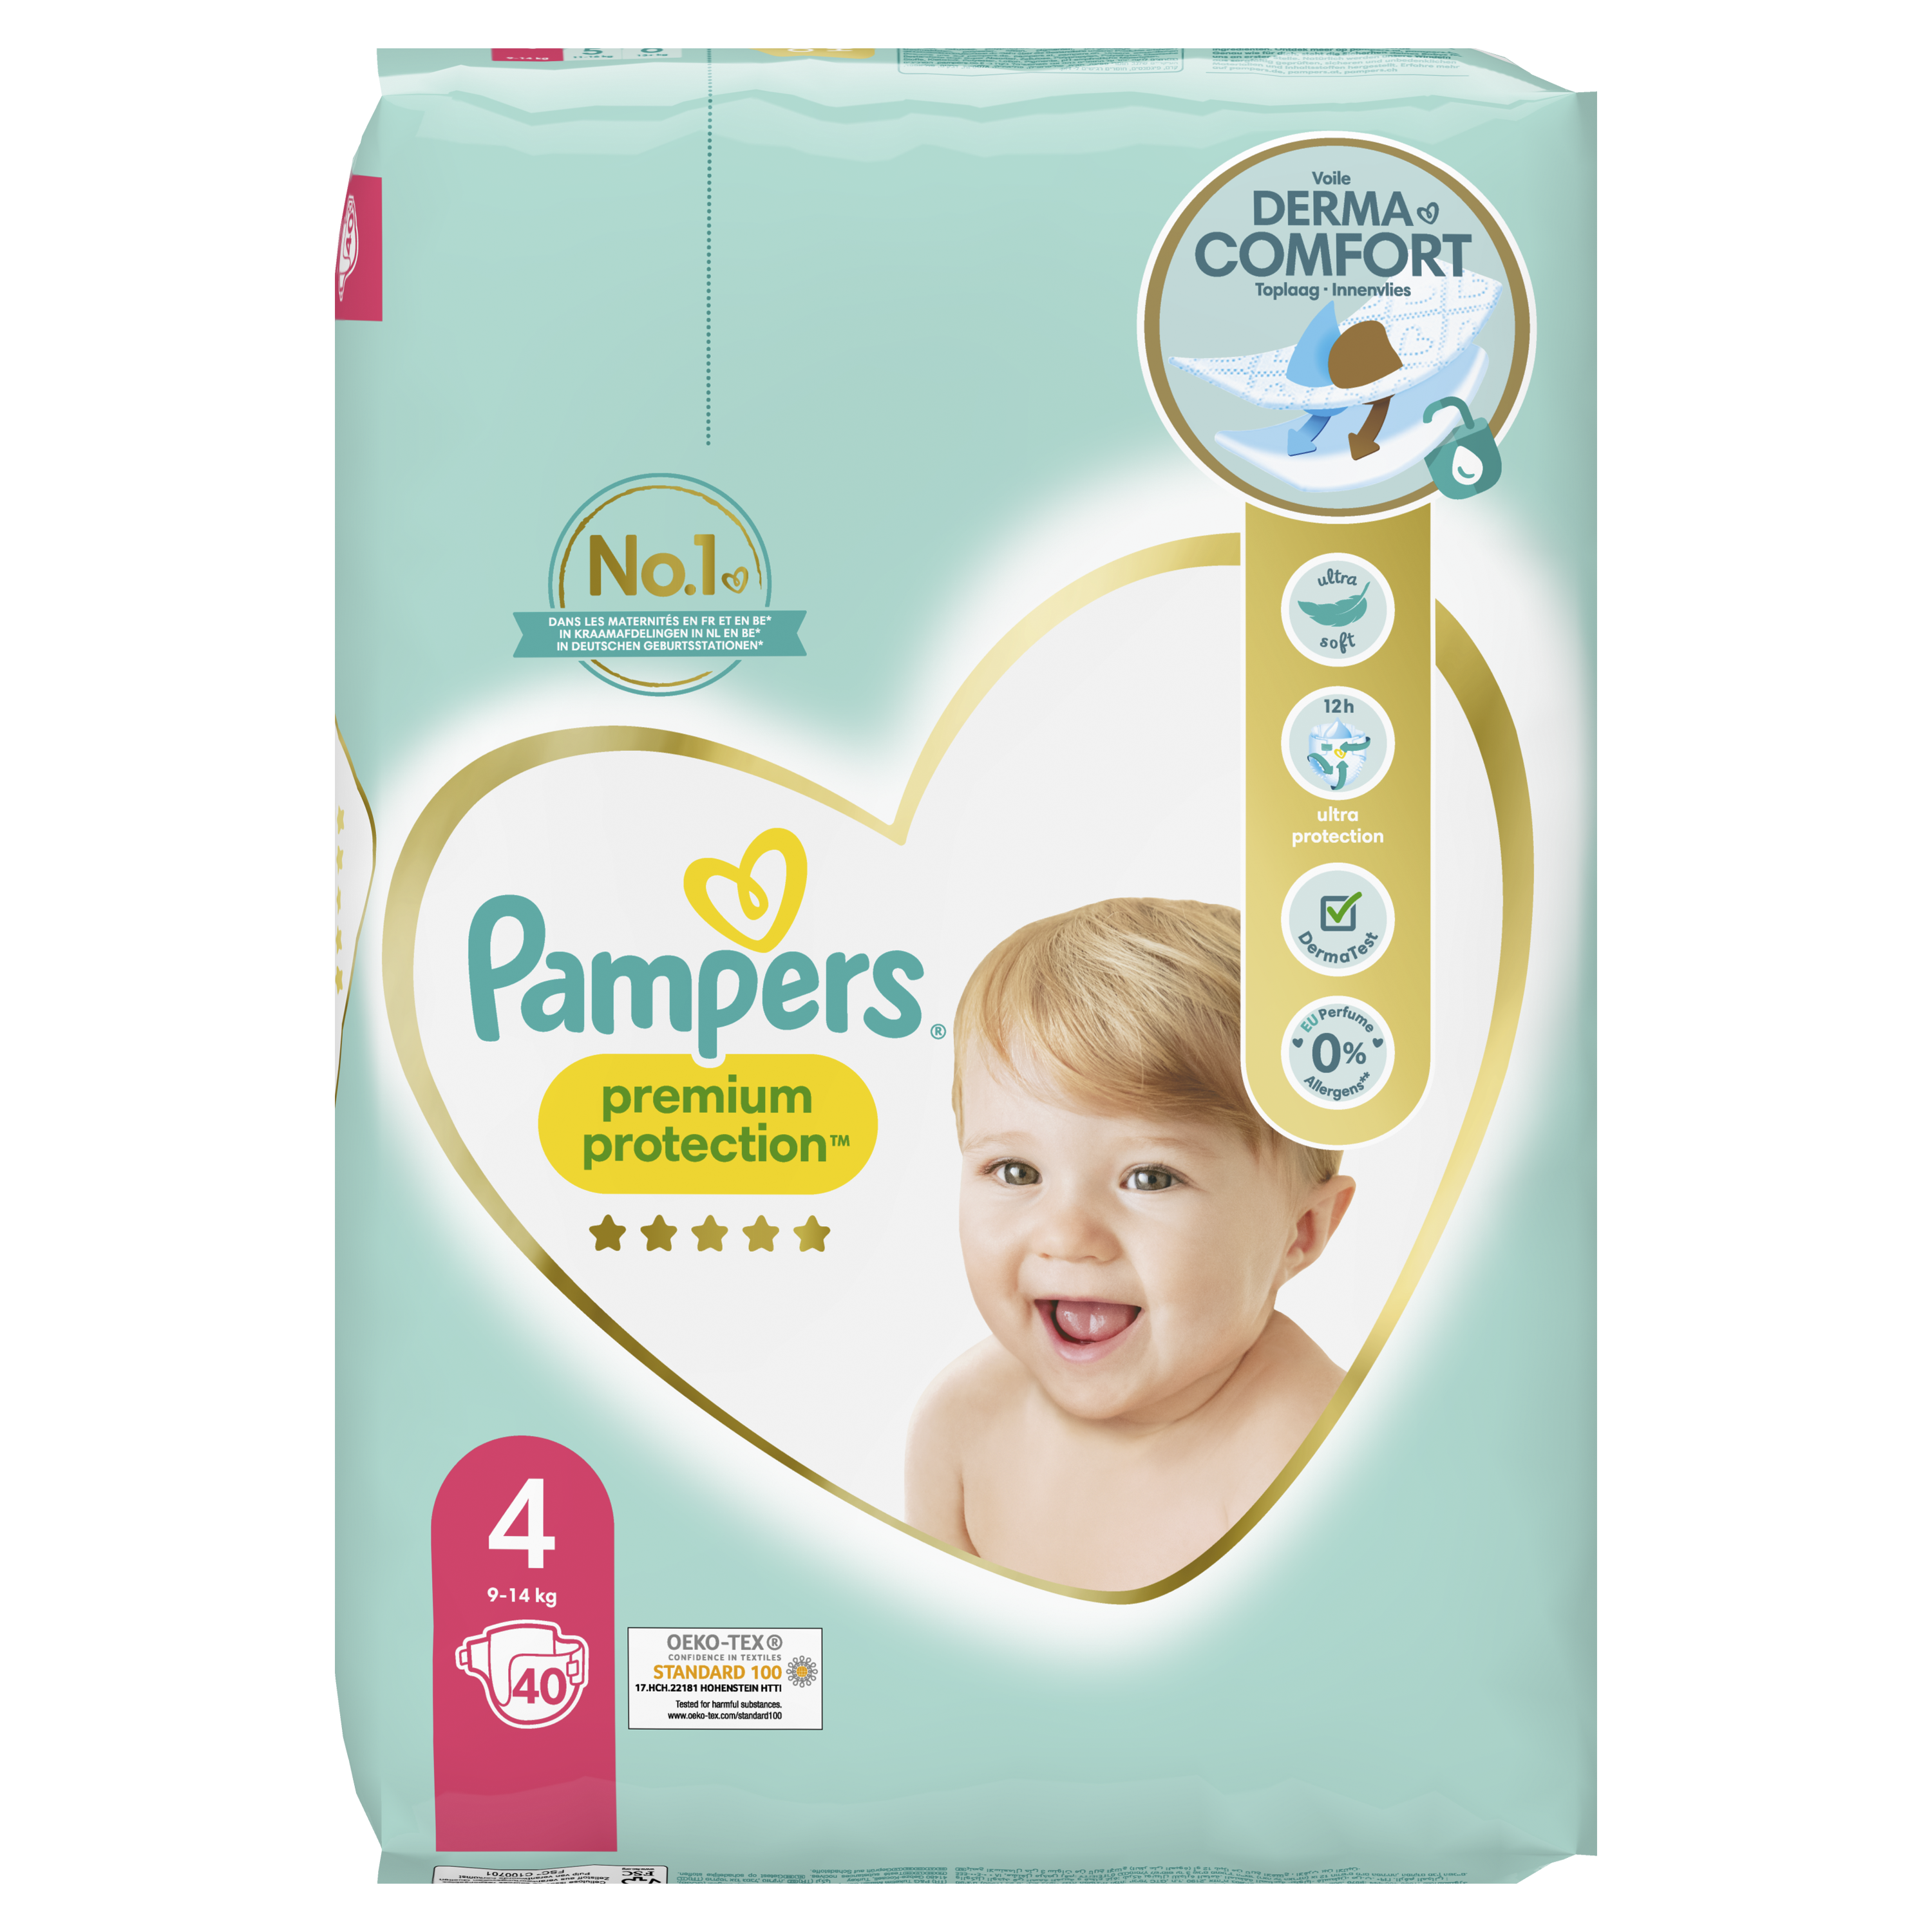 Pampers Premium Protection Taille 4 - 9-14kg - 23 pcs Couches